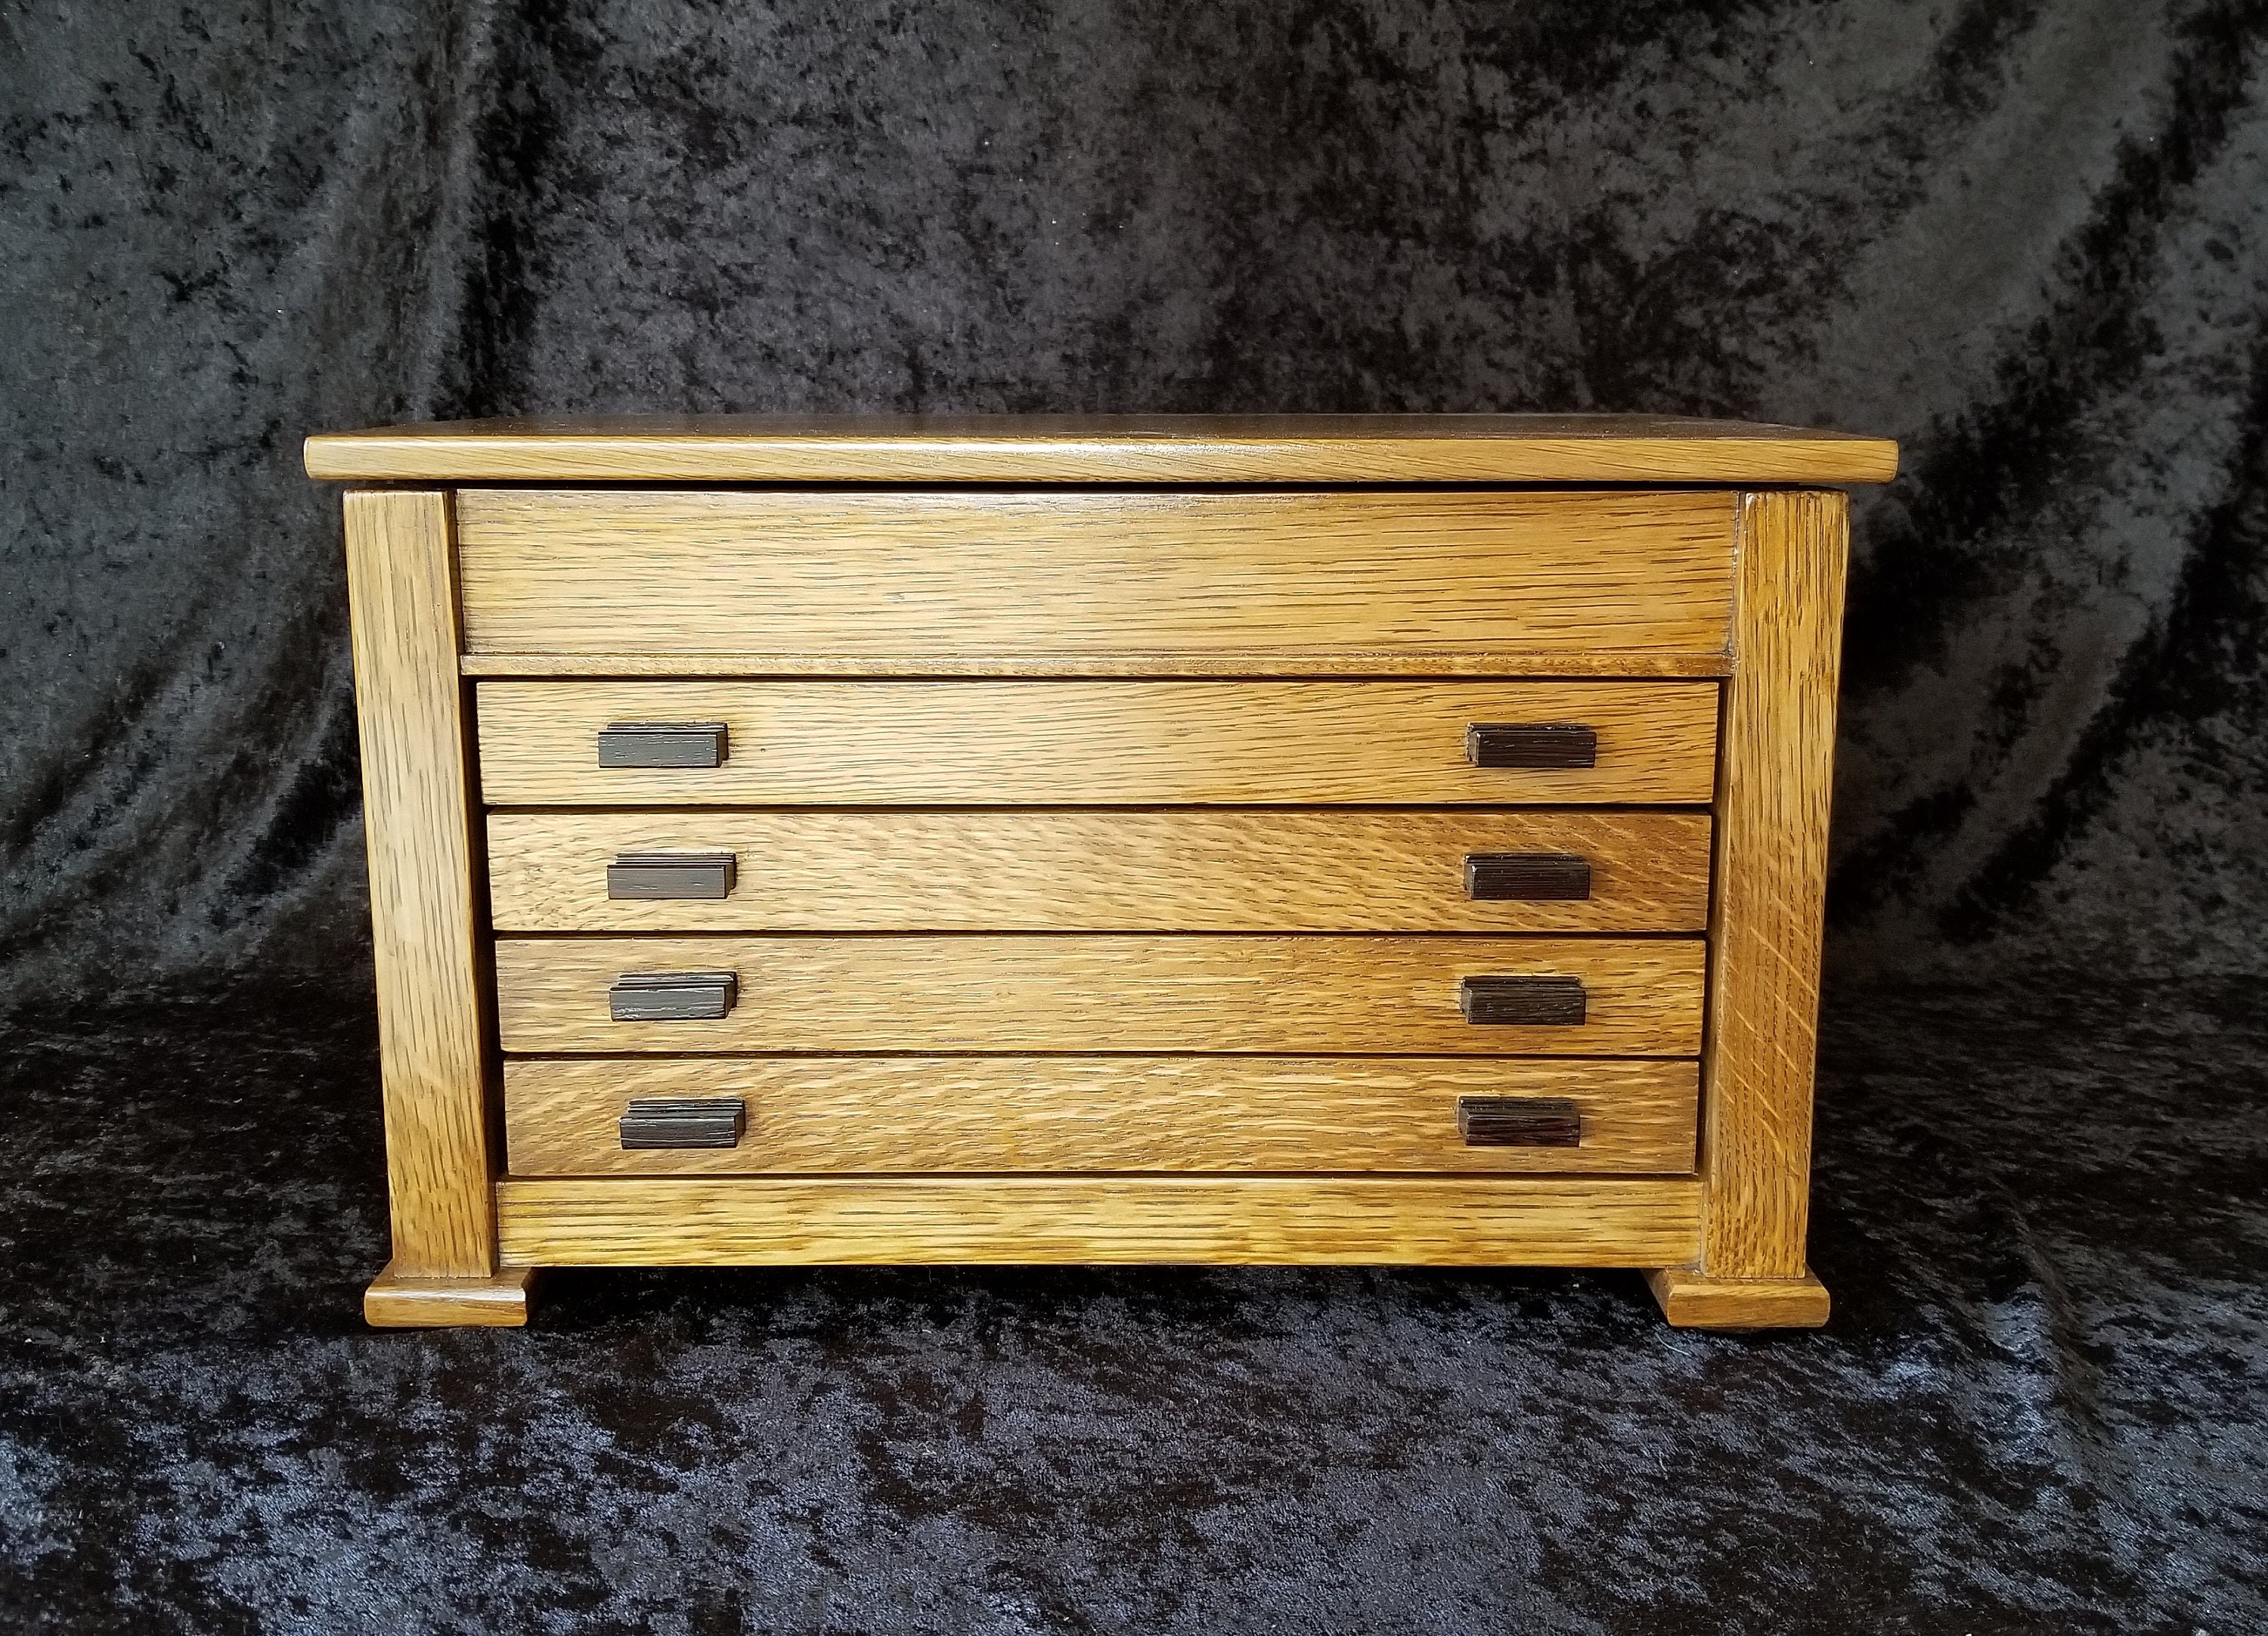 Handmade Wooden Jewelry Box With Drawers, Large Jewelry Box